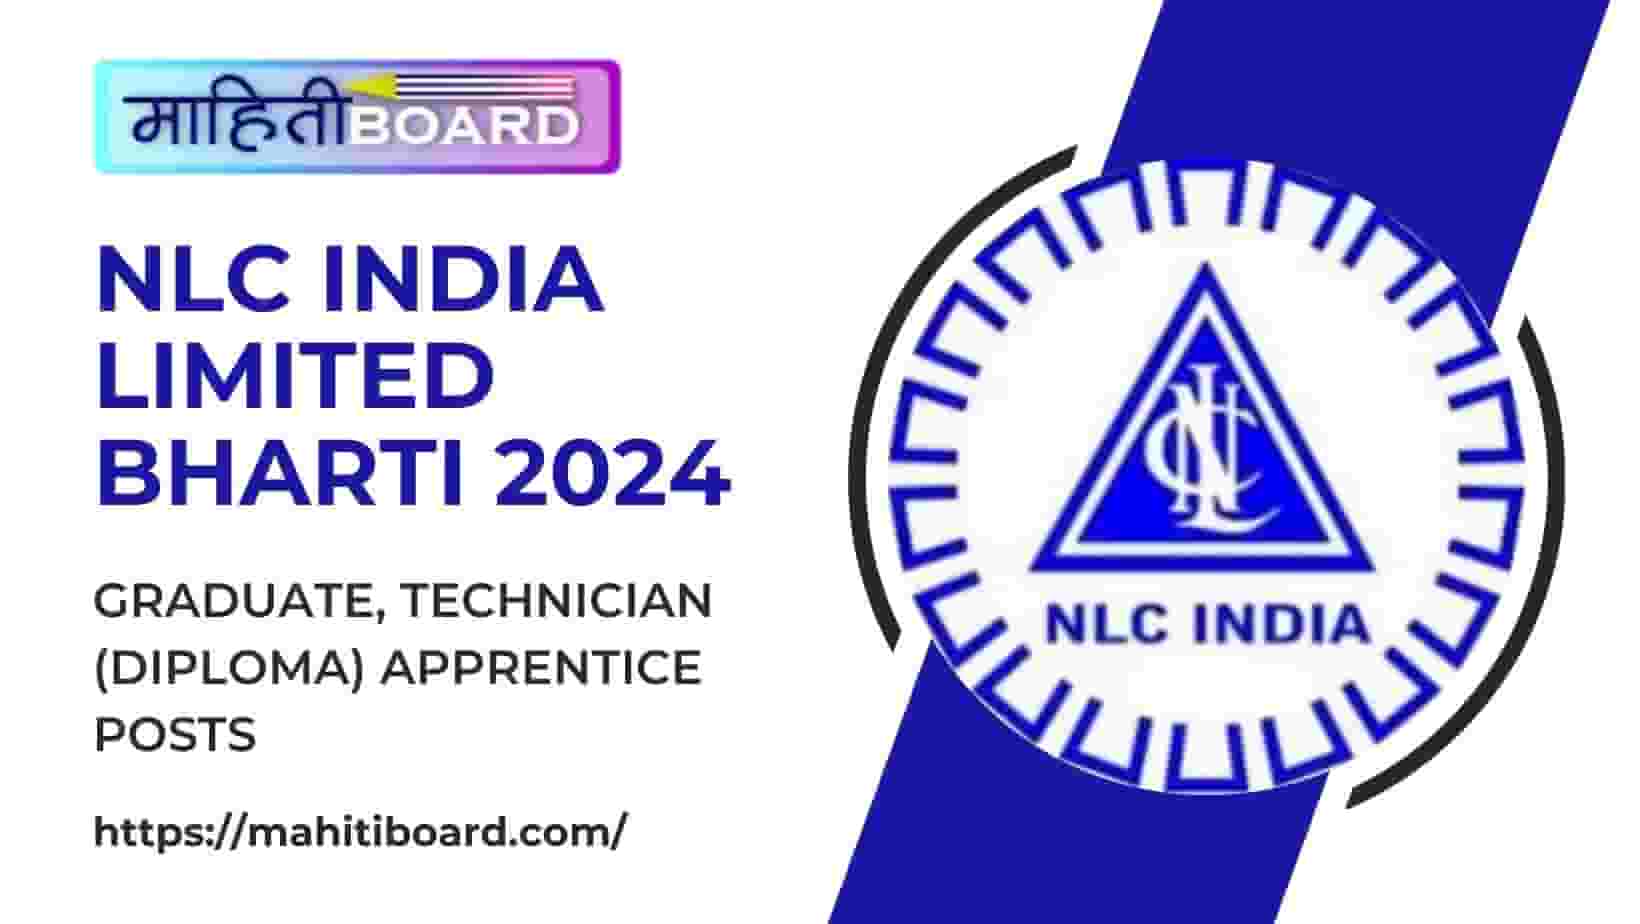 NLC India Limited Bharti 2024